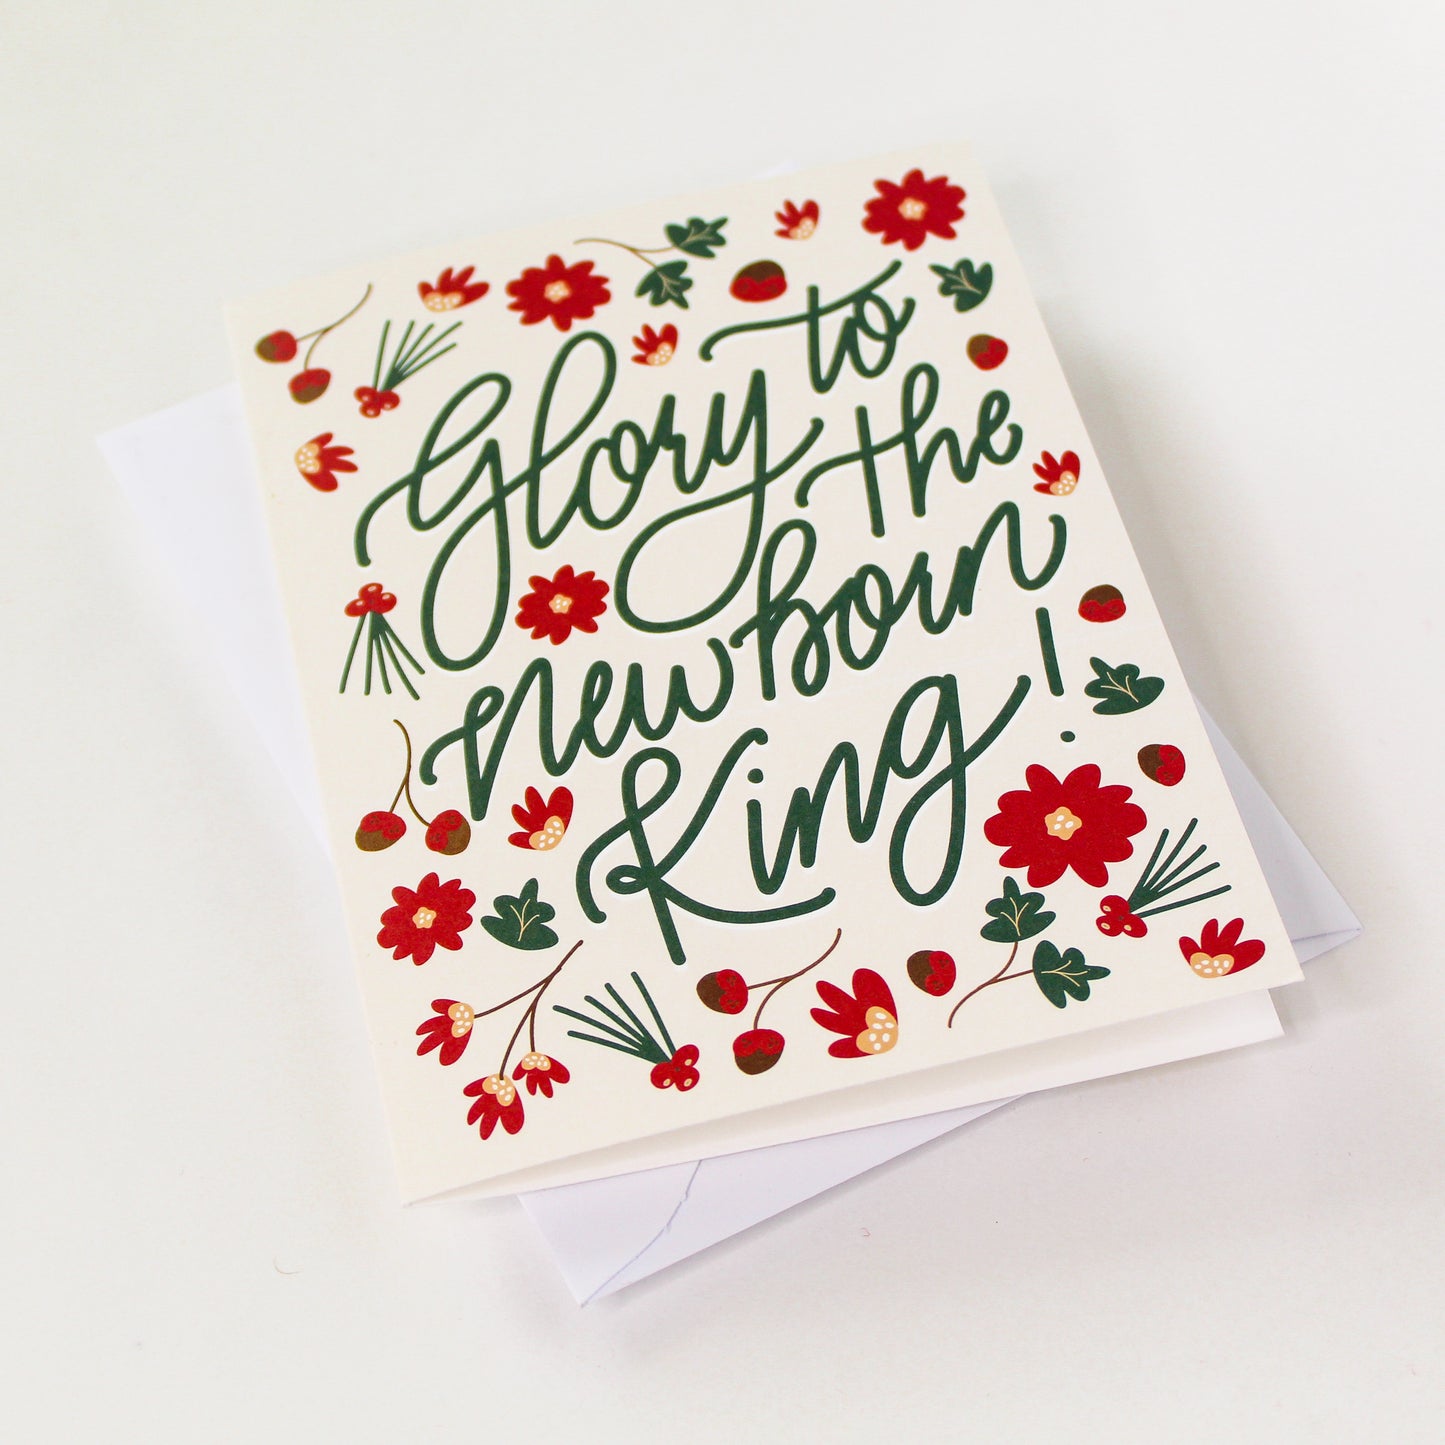 "Glory to the Newborn King!" Christmas Greeting Card is a festive way to bring joy during the holiday season. Each card is folded to 4.25" tall by 5.5" wide, is blank inside and comes with a matching white envelope. Cards are packaged in cellophane sleeves.